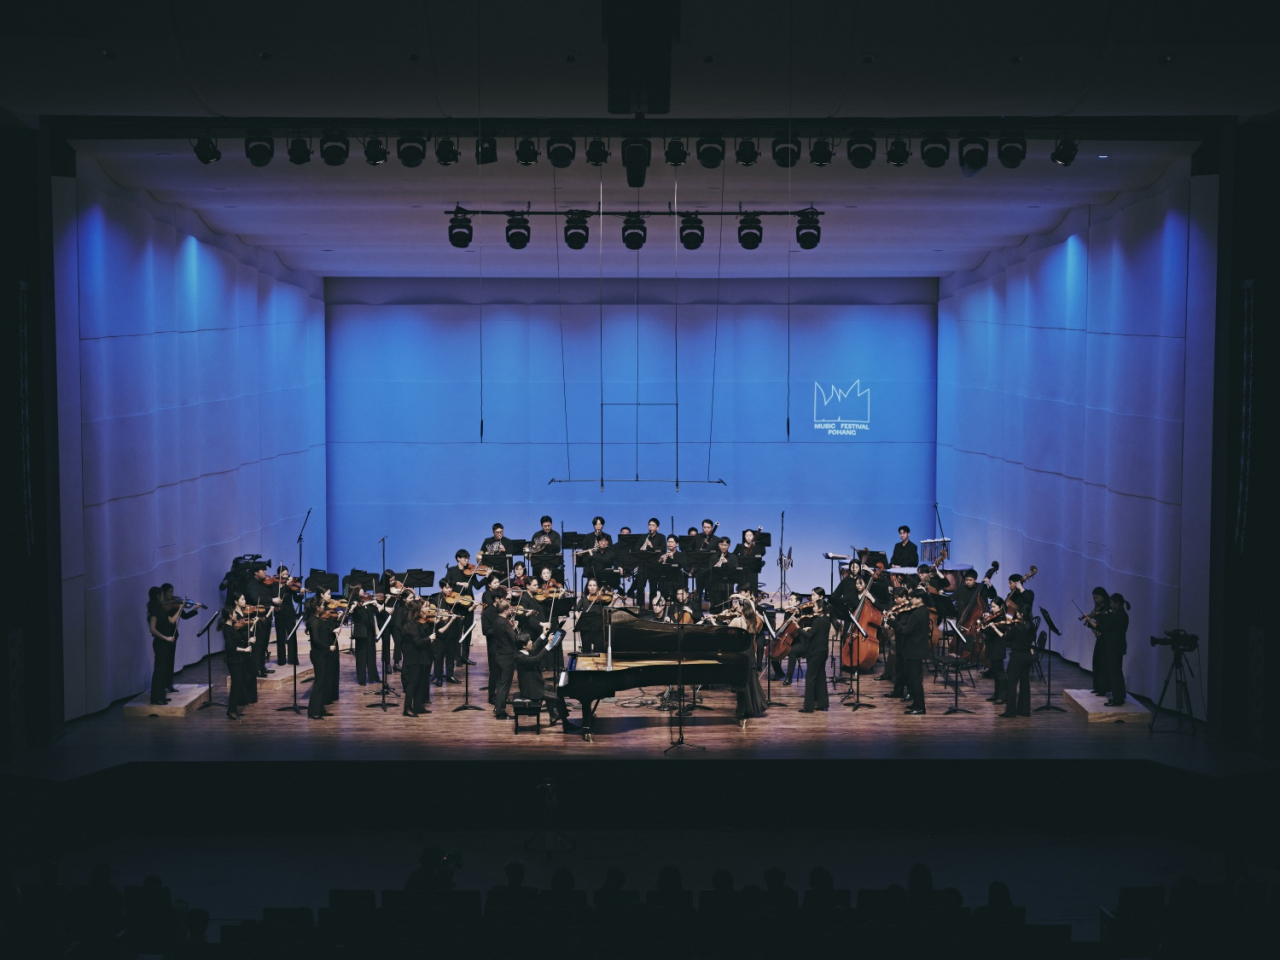 The Pohang Festival Orchestra and pianist Sohn Min-soo perform Beethoven's Piano Concerto No. 4 in G Major, Op. 58 for the opening of the Musical Festival Pohang on Saturday at the Pohang Culture and Art Hall, in Pohang, North Gyeongsang Province. (Musical Festival Pohang)